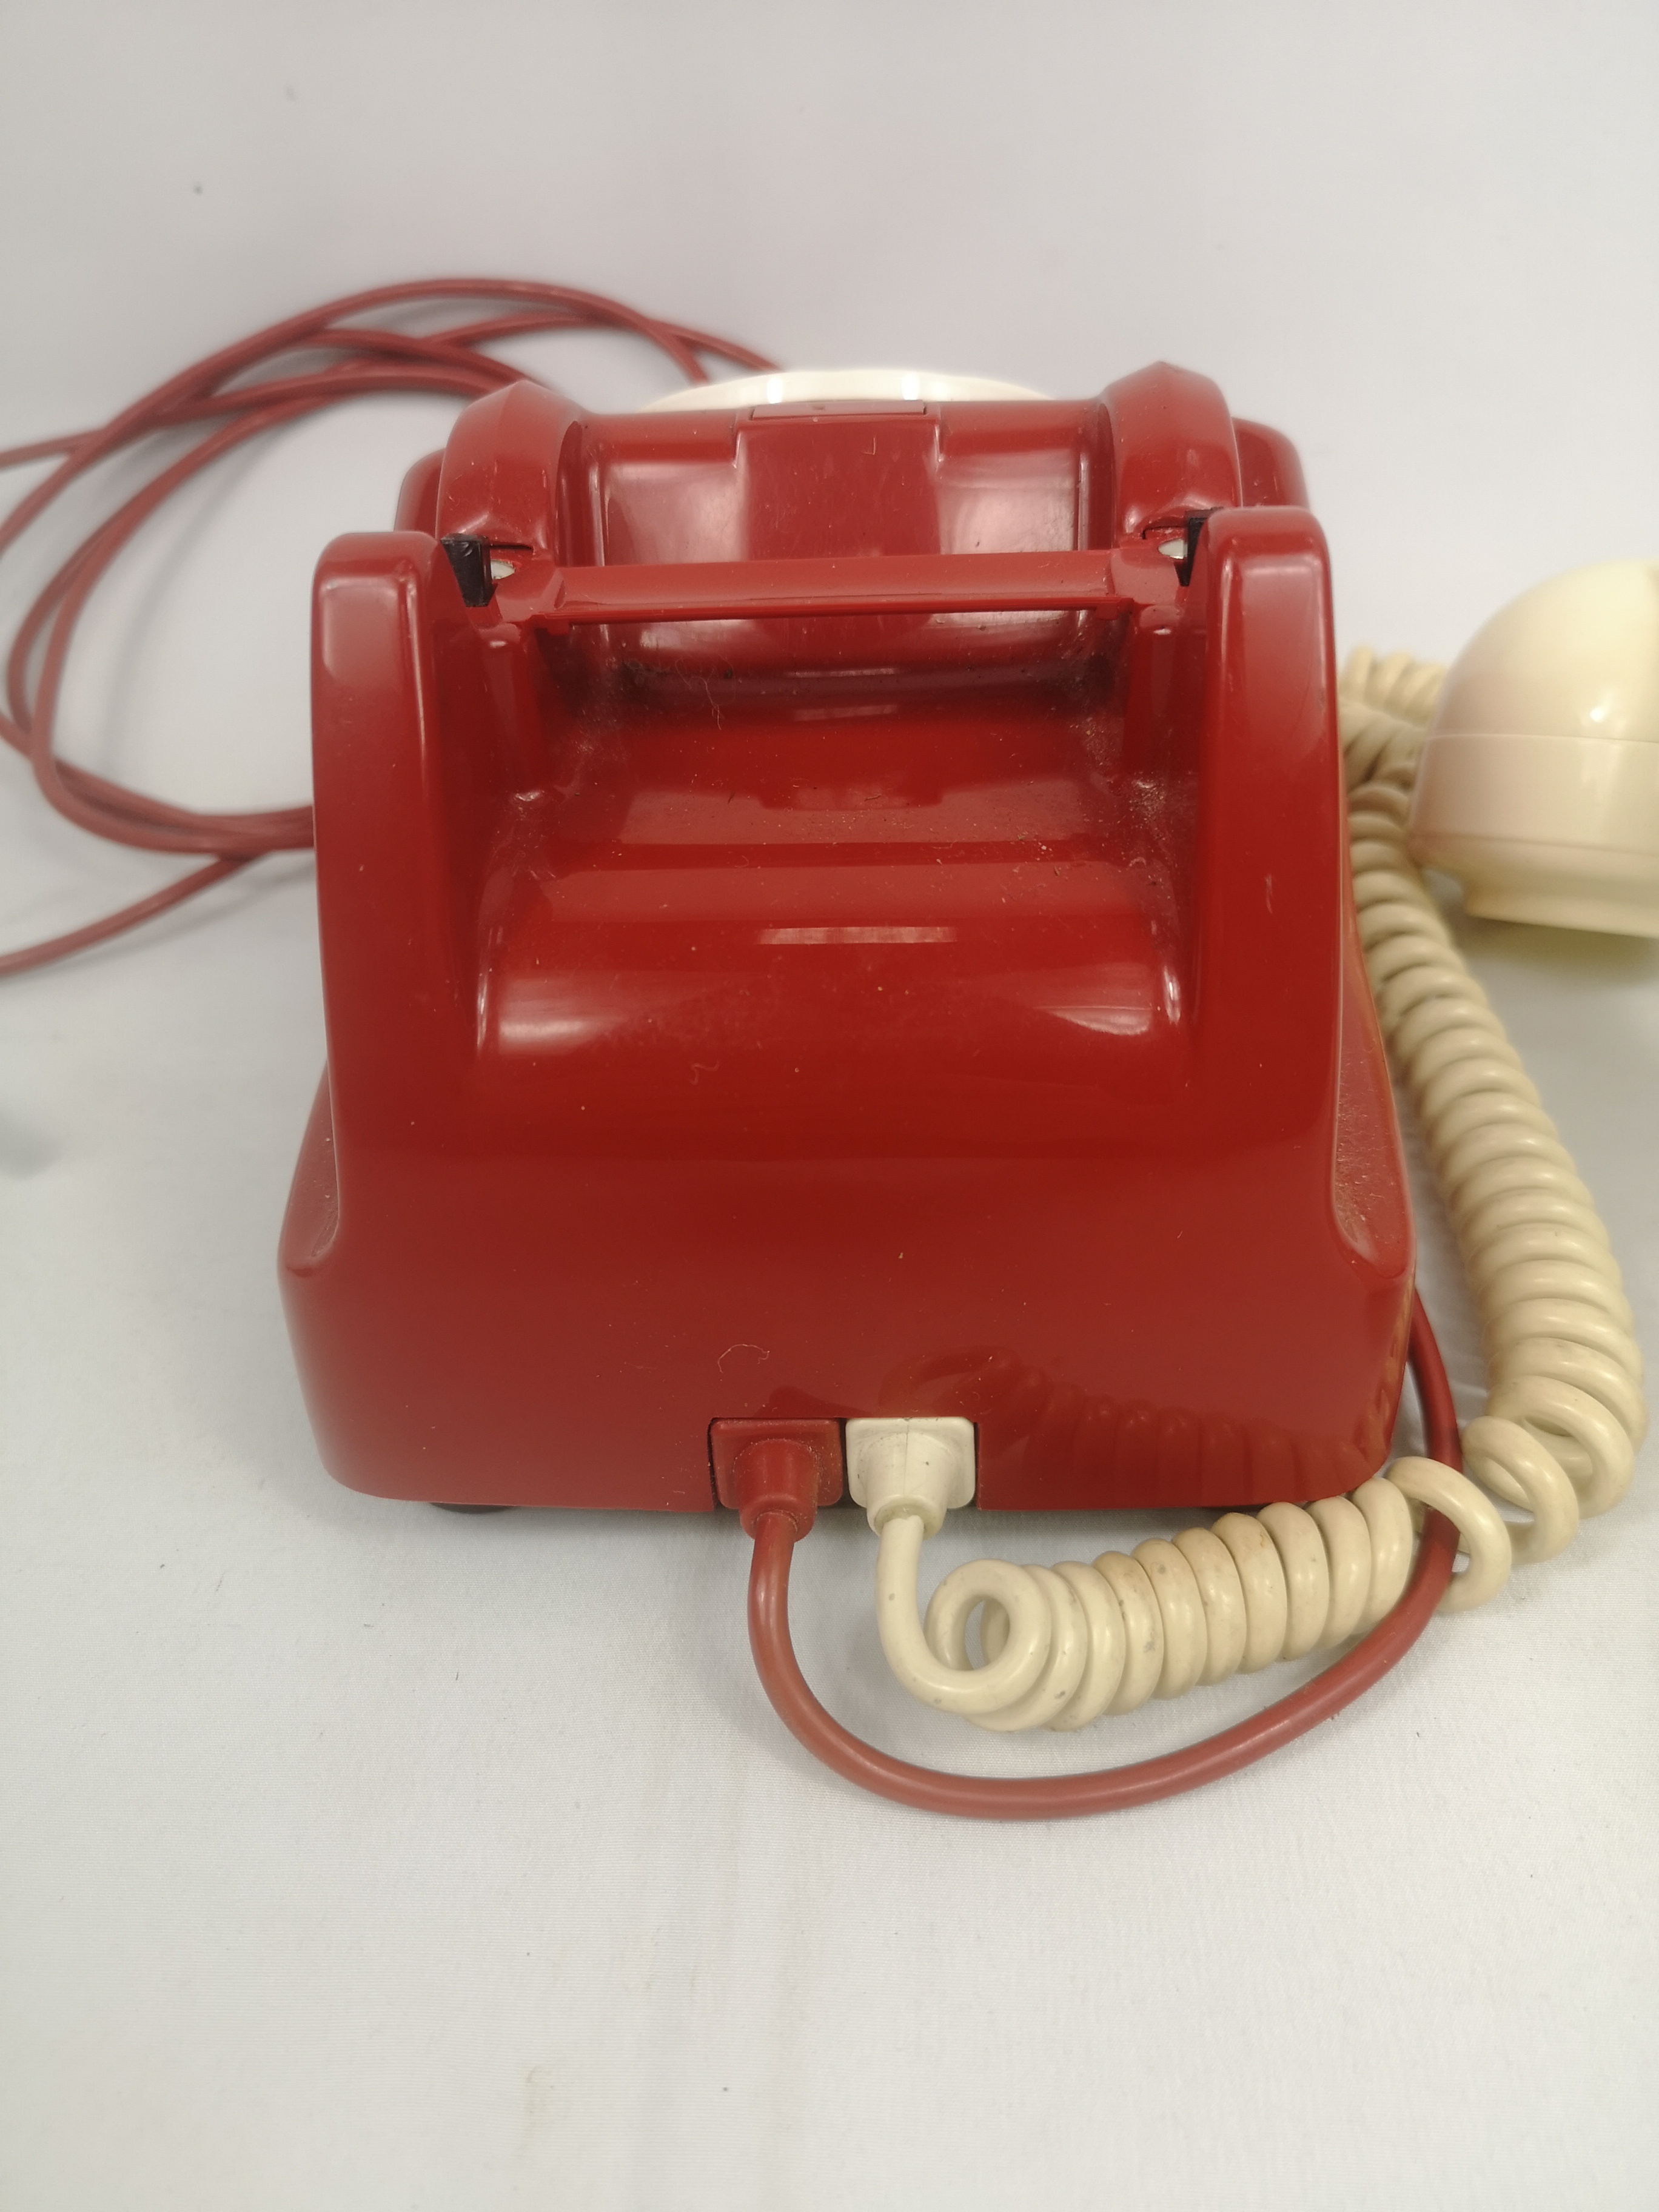 Rotary dial telephone - Image 5 of 5